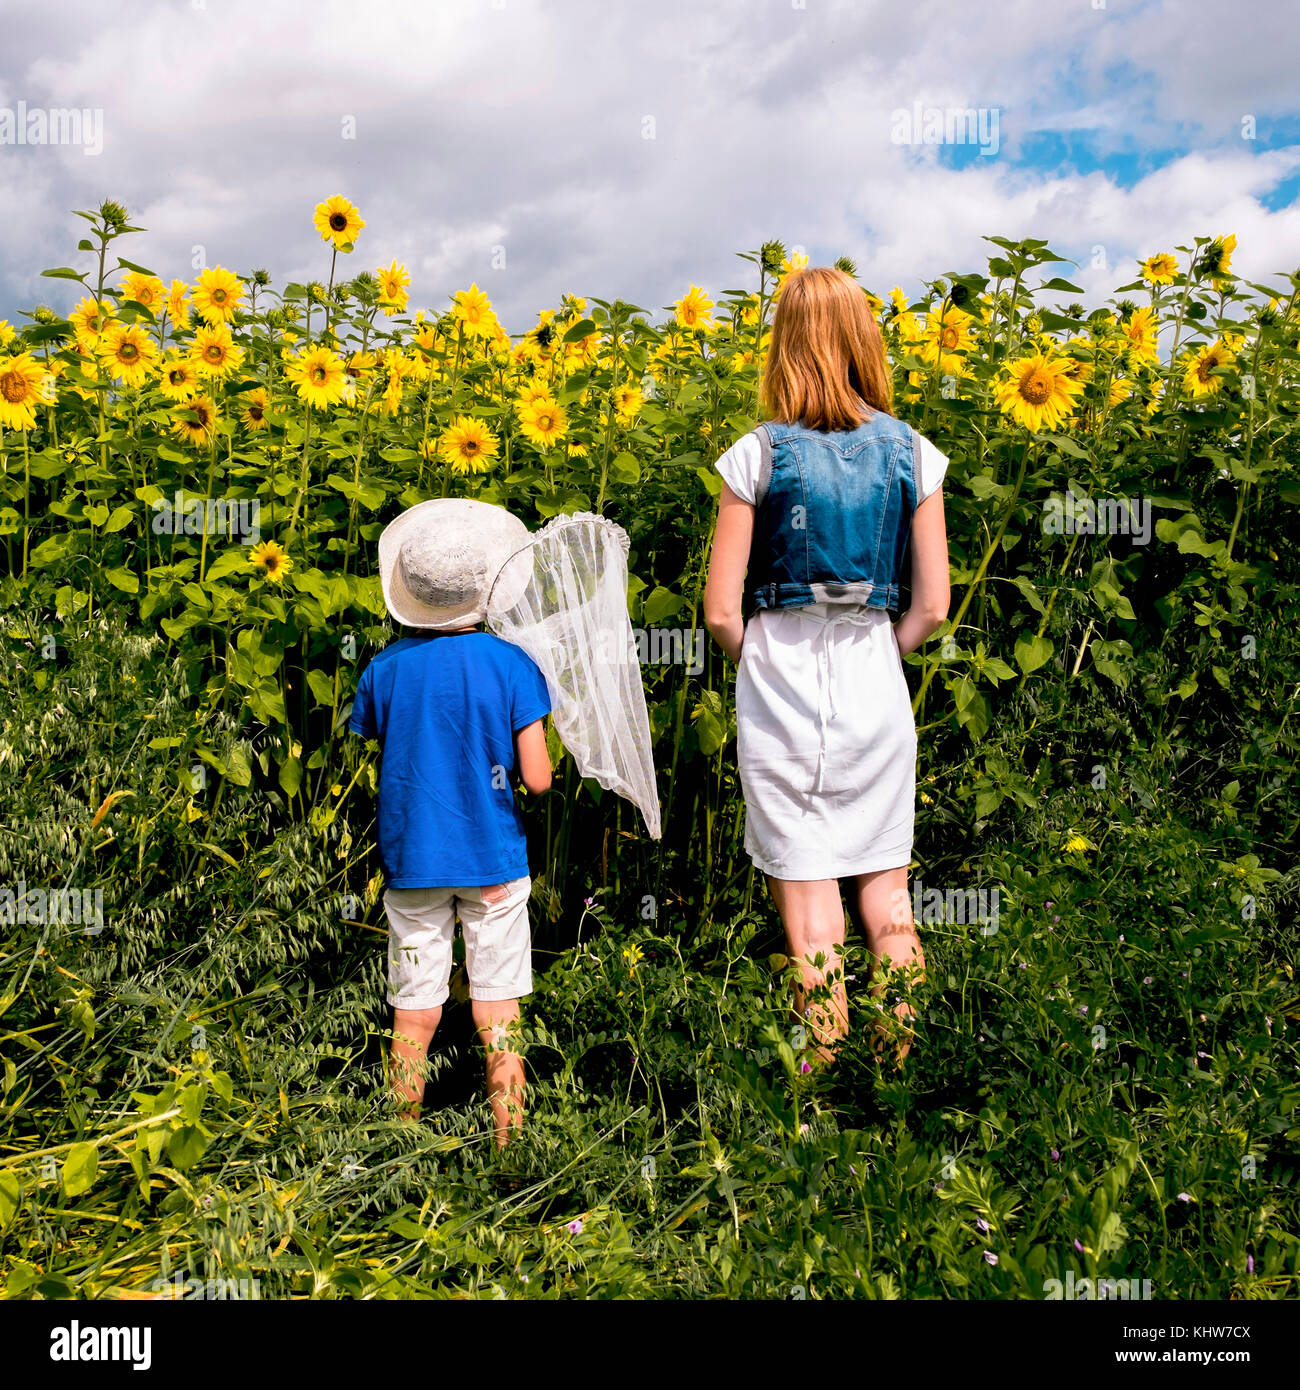 Mother and son standing in filed of sunflowers, son holding butterfly net, rear view, Sverdlovsk, Russia, Europe Stock Photo